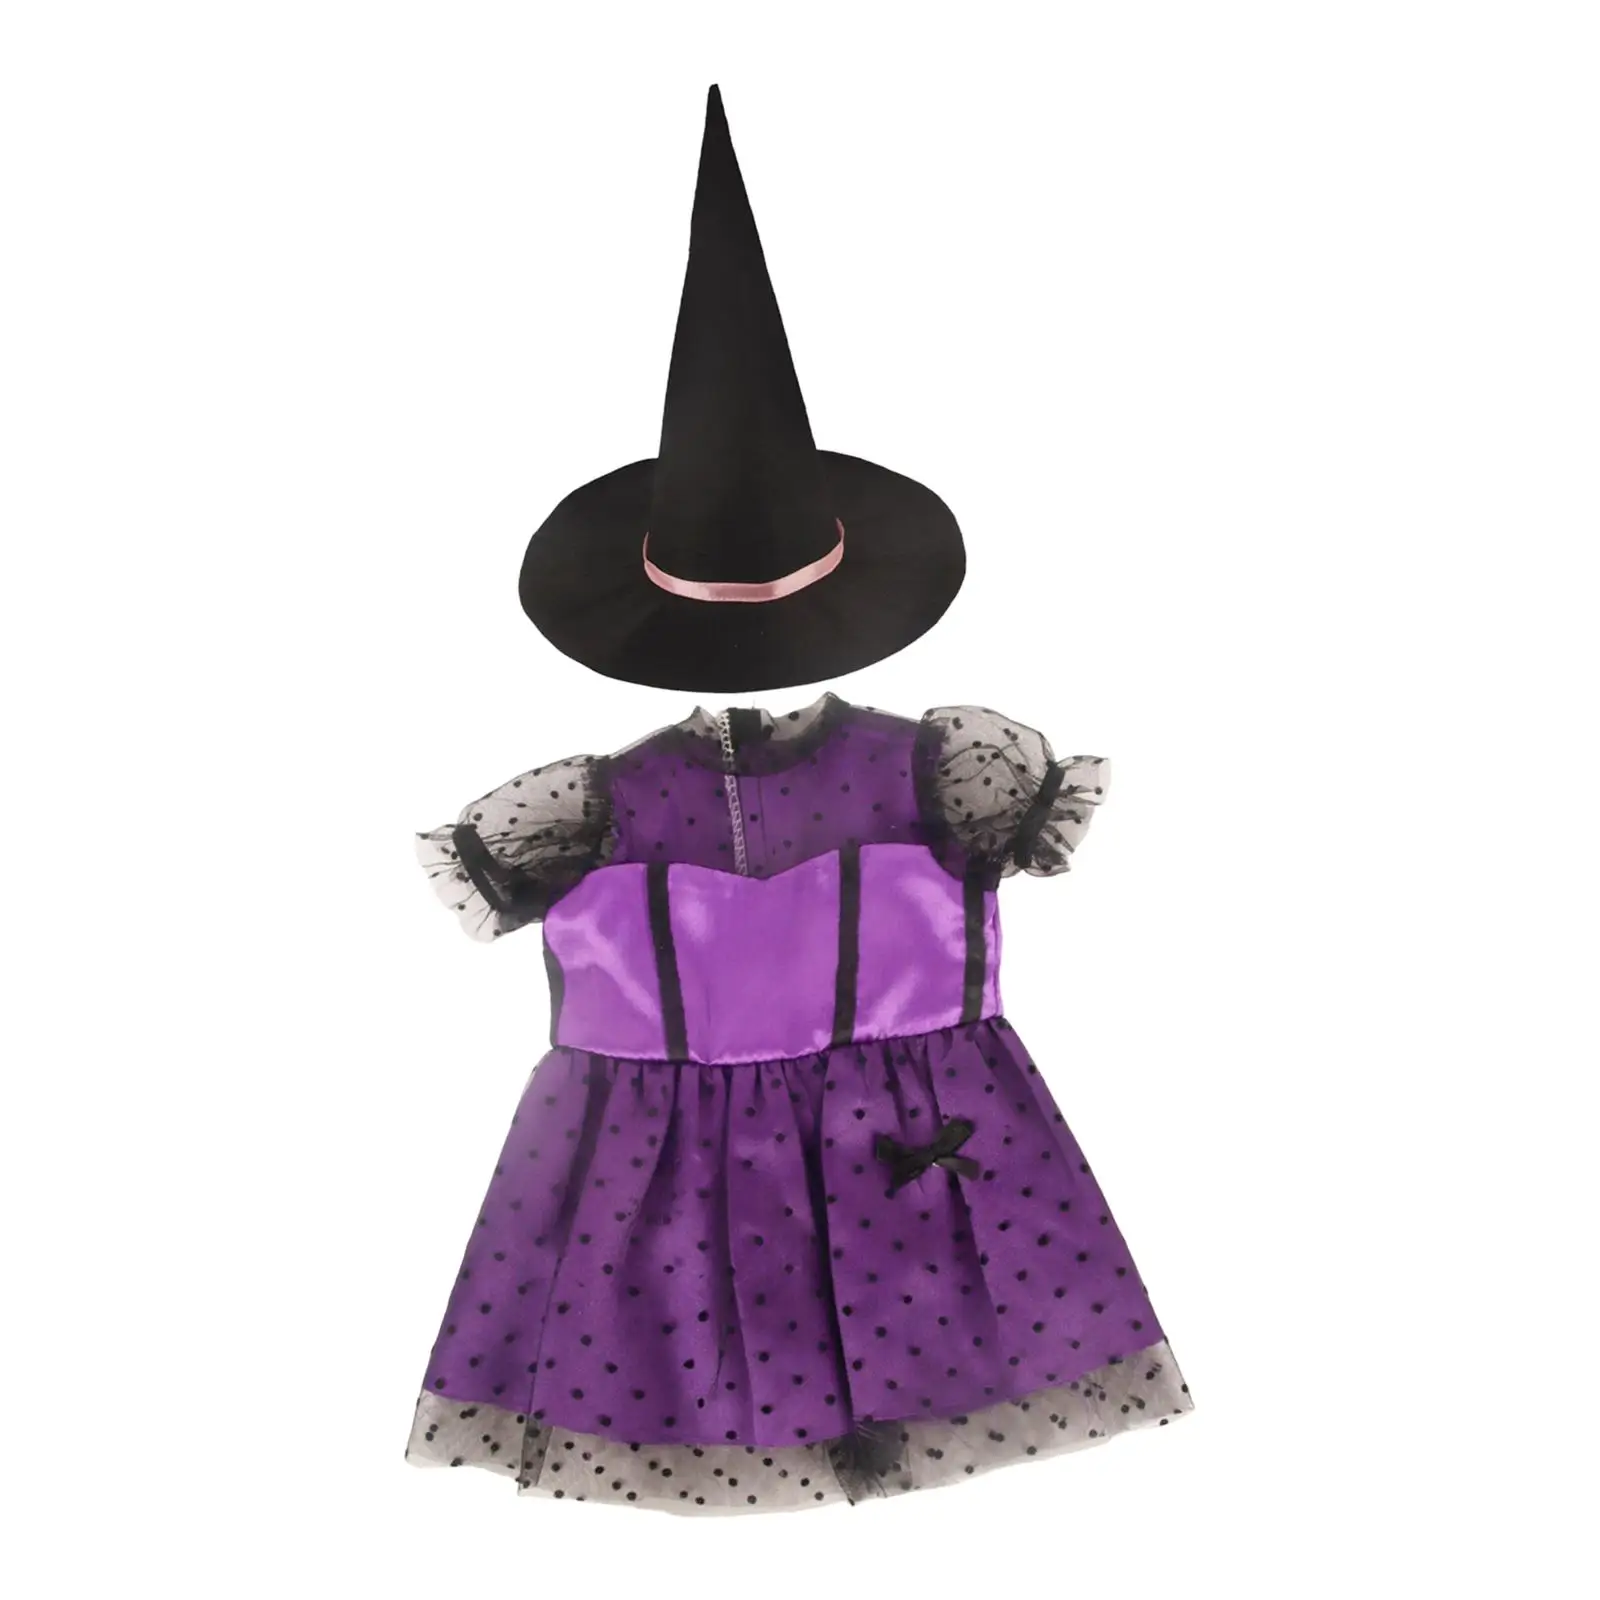 18`` Doll Dress Outfit Outfit Party Dress Halloween Doll Costumes for Cosplay Birthday Carnivals Festival Everyday Play